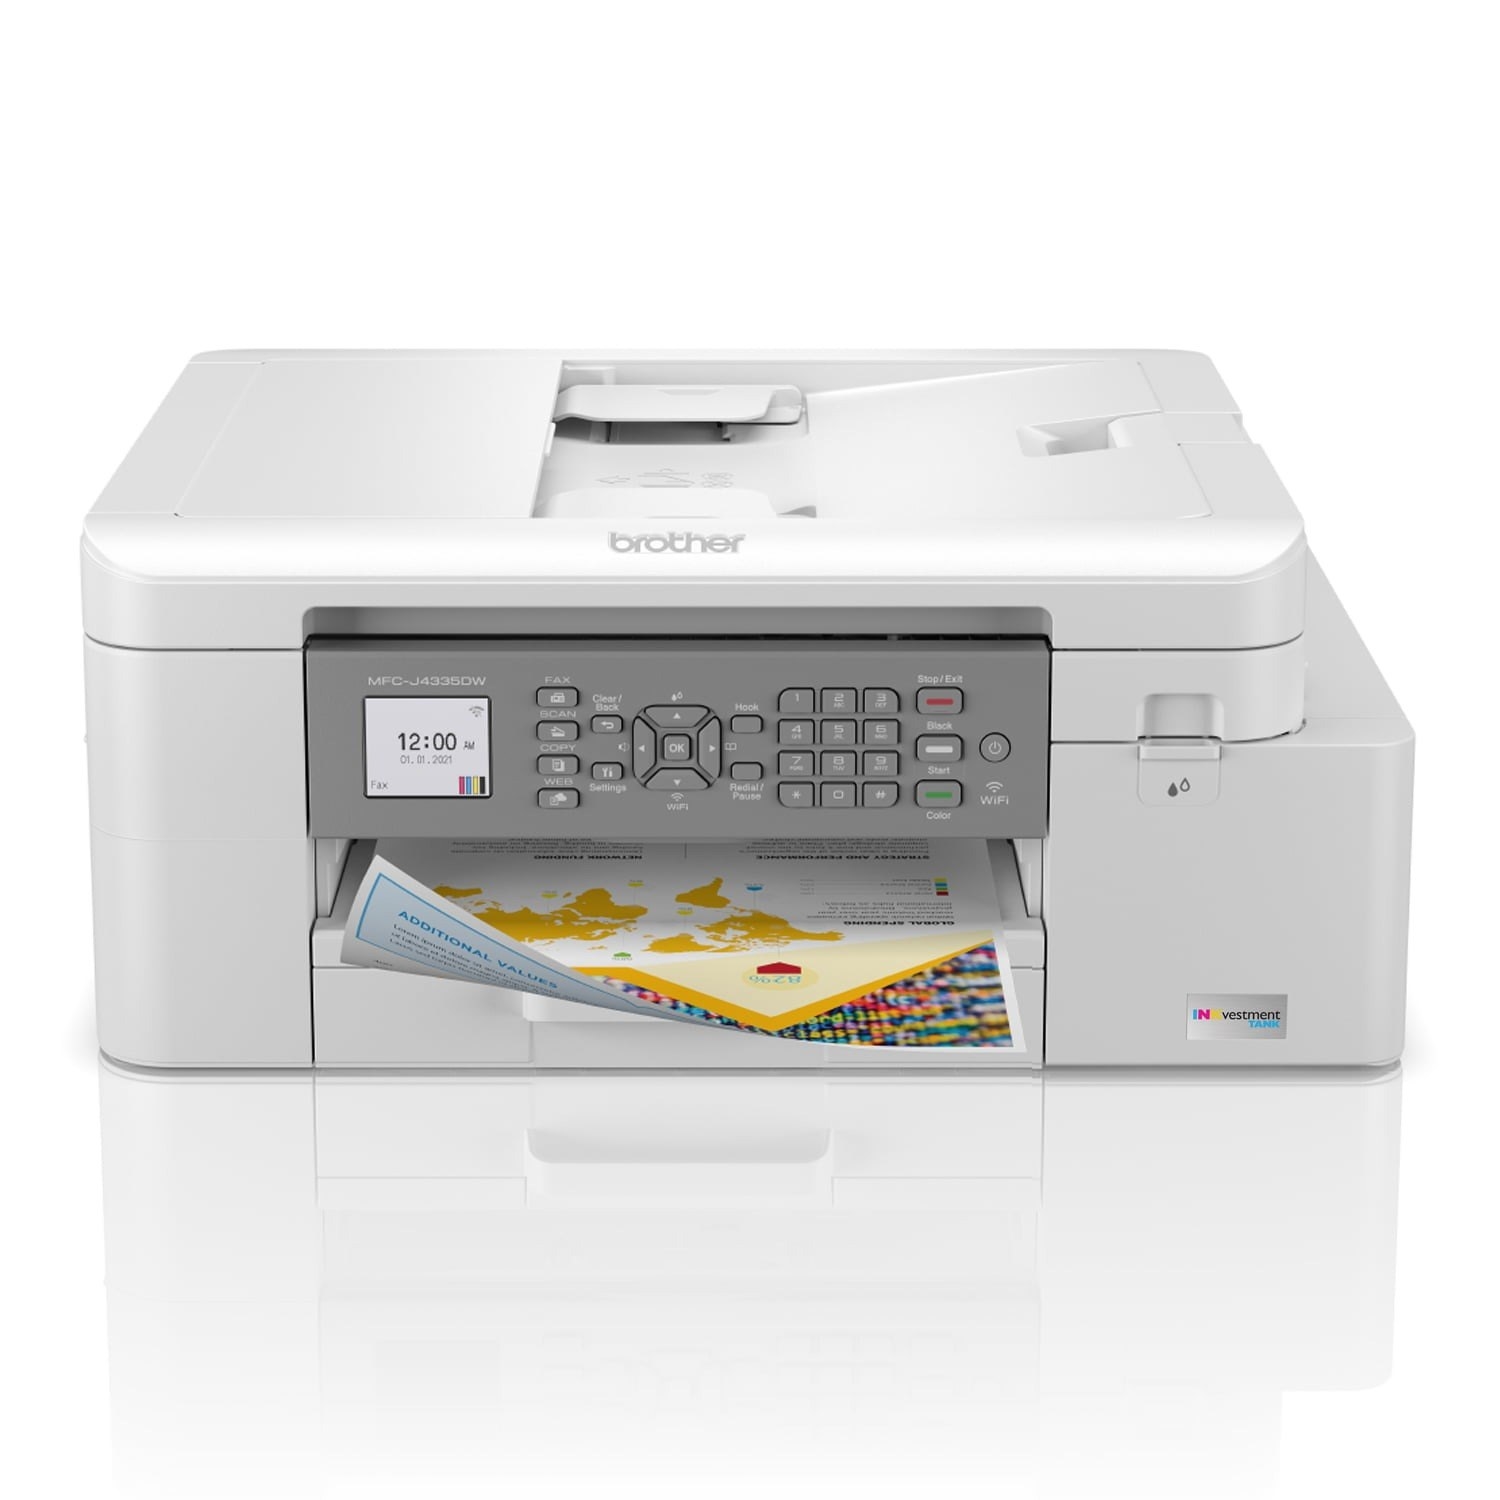 the white and gray printer